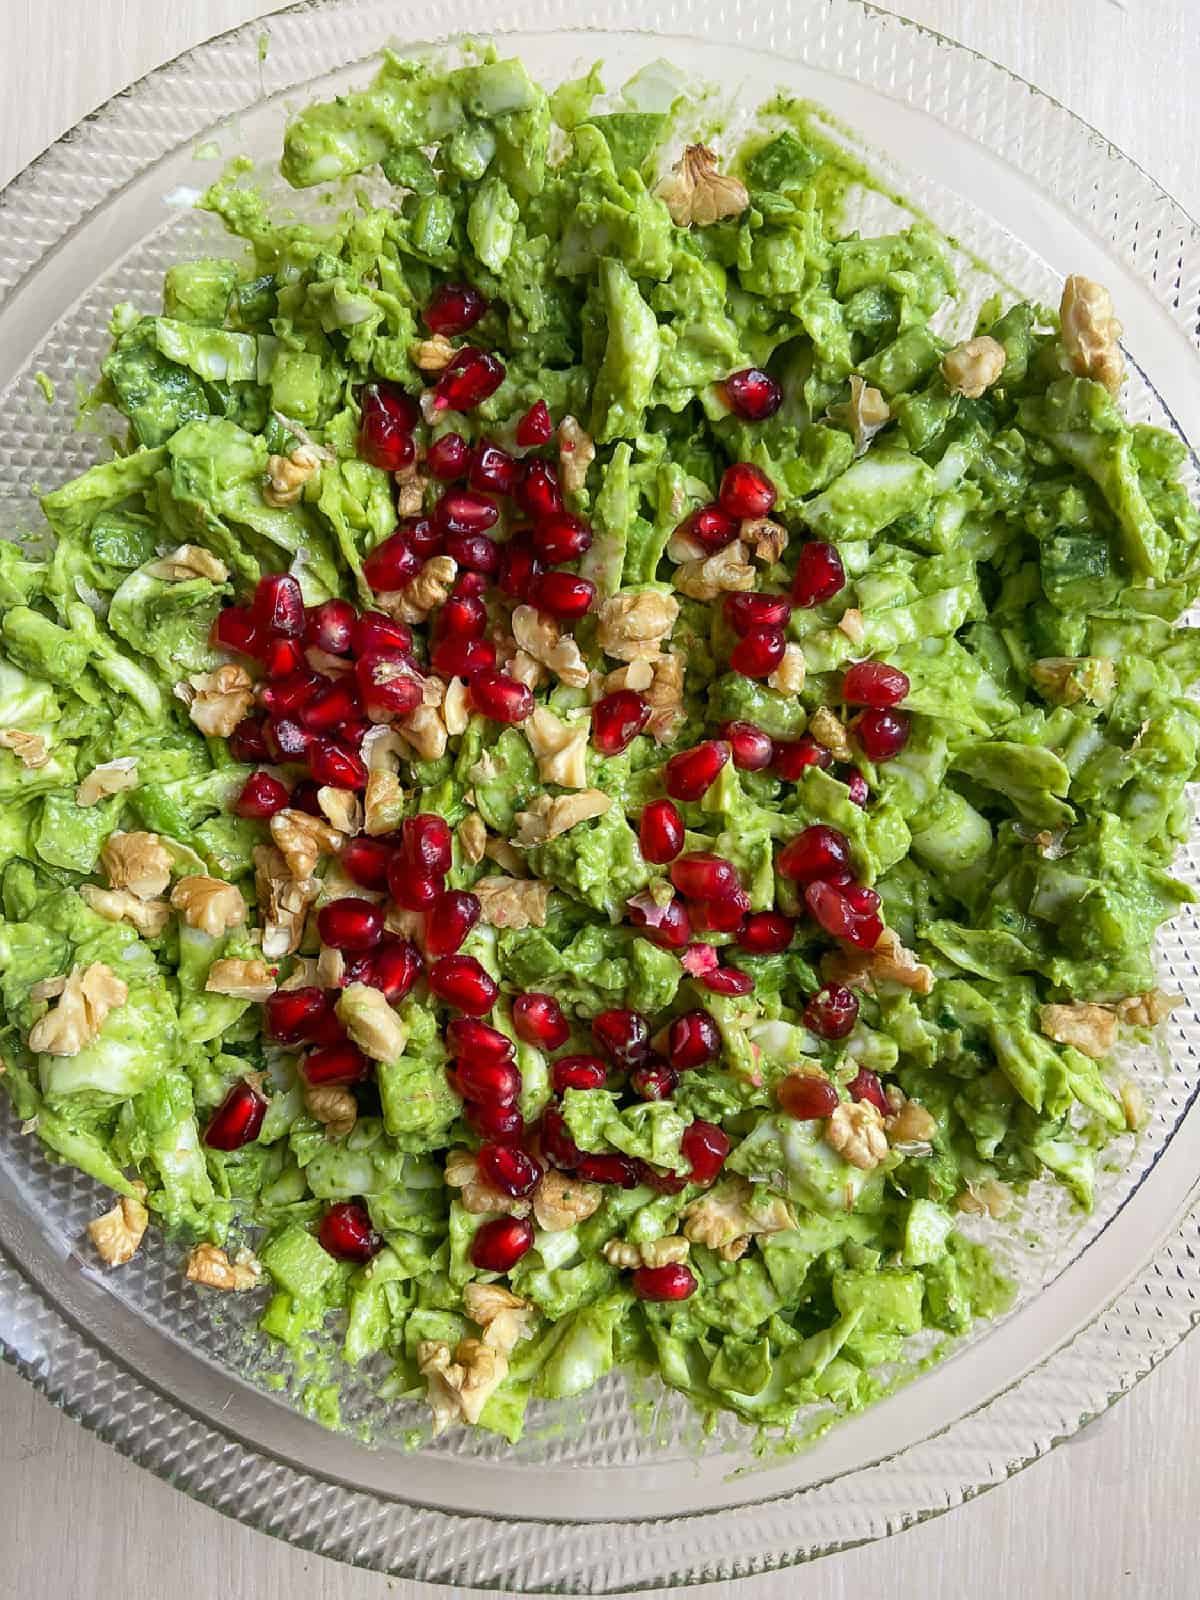 This viral TikTok green goddess salad is delicious! Ready in 15 minutes, this salad can be served as a side, dip or sandwich topping.
